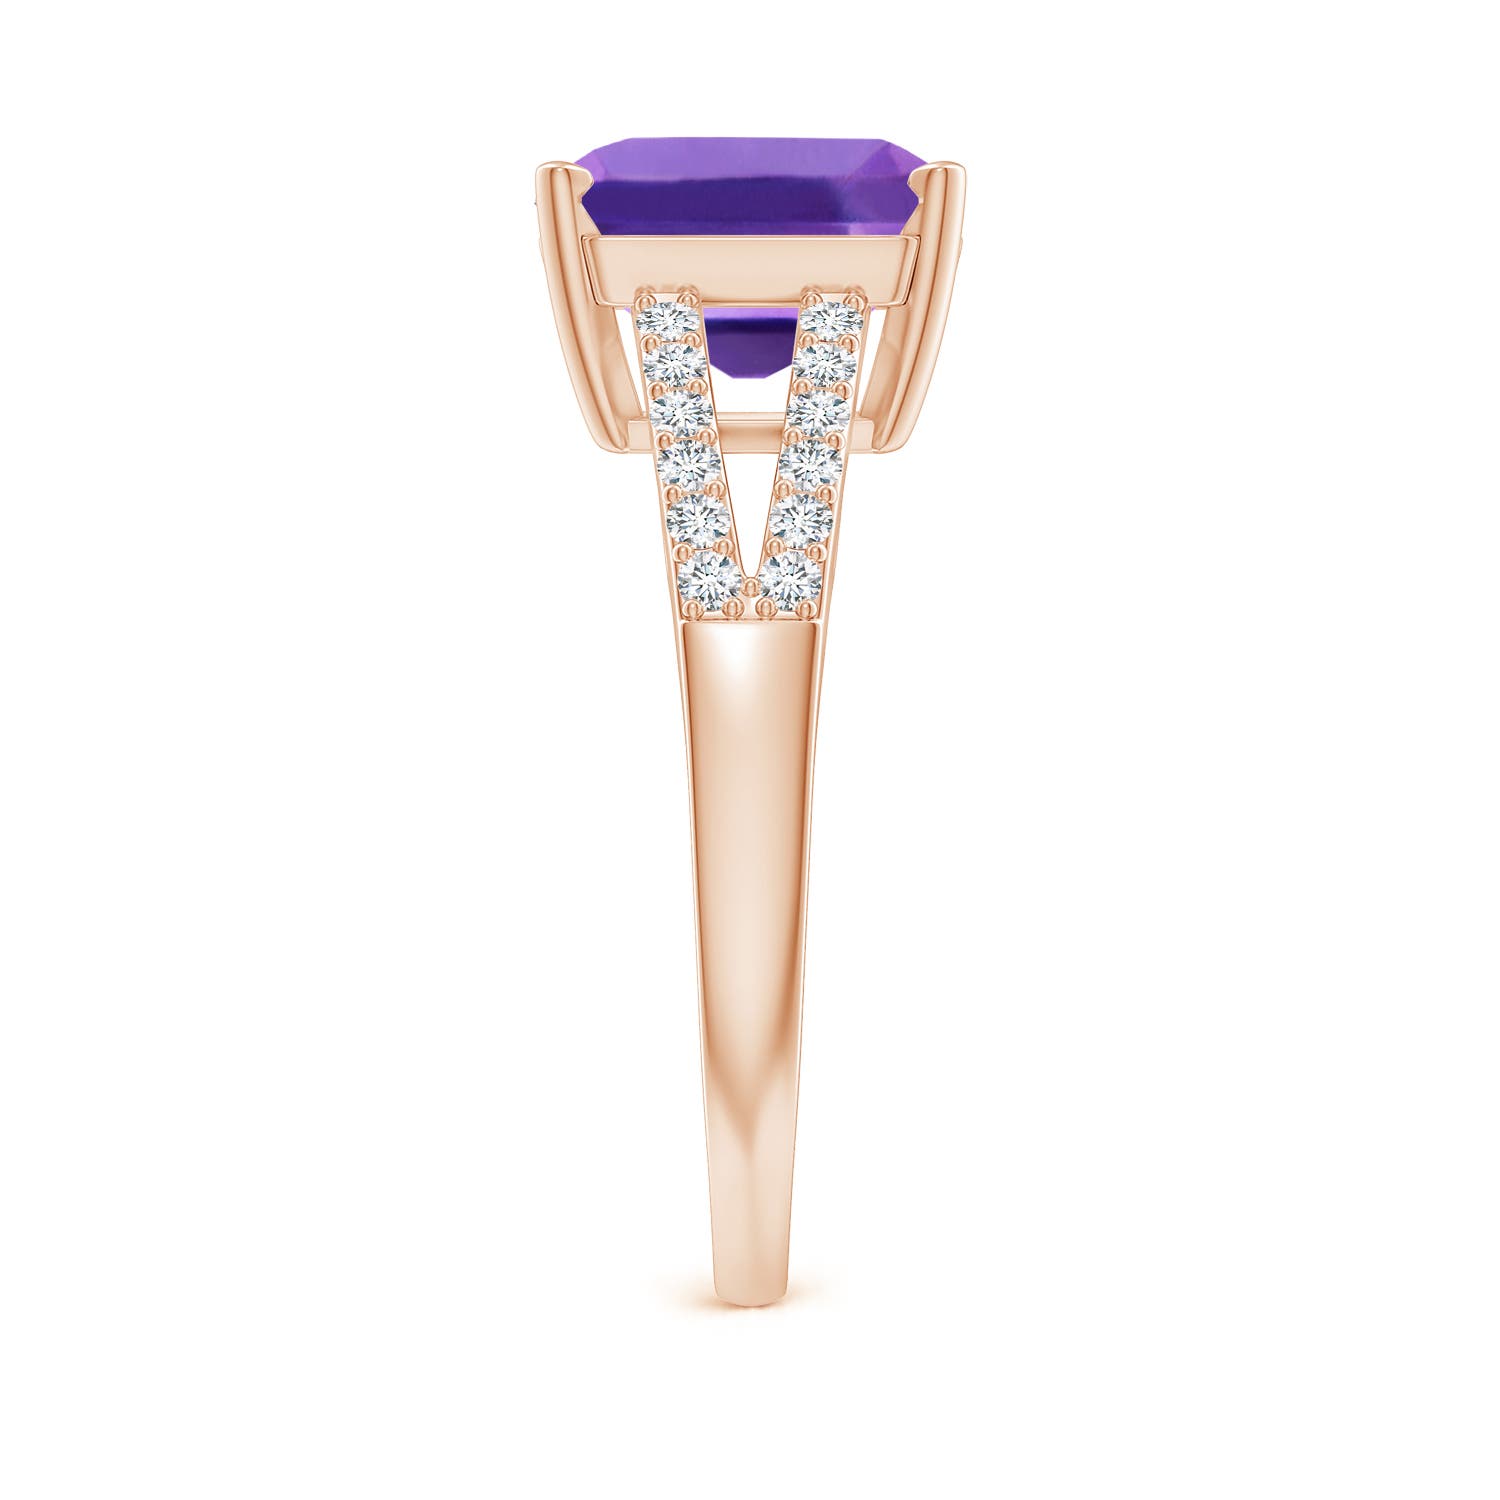 AAA - Amethyst / 3.04 CT / 14 KT Rose Gold